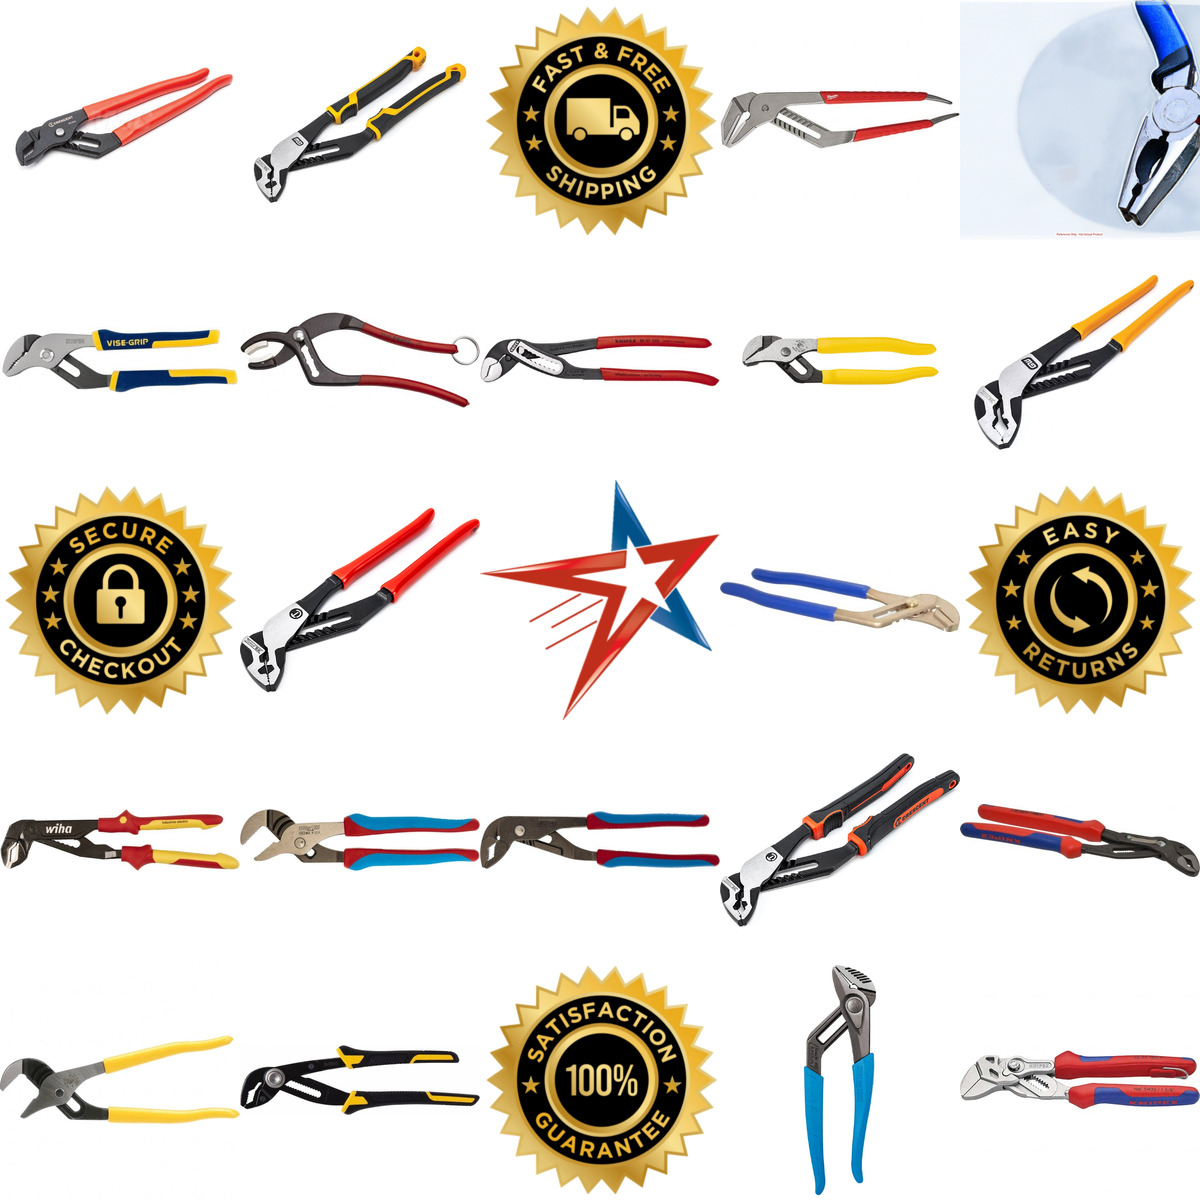 A selection of Tongue and Groove Pliers products on GoVets